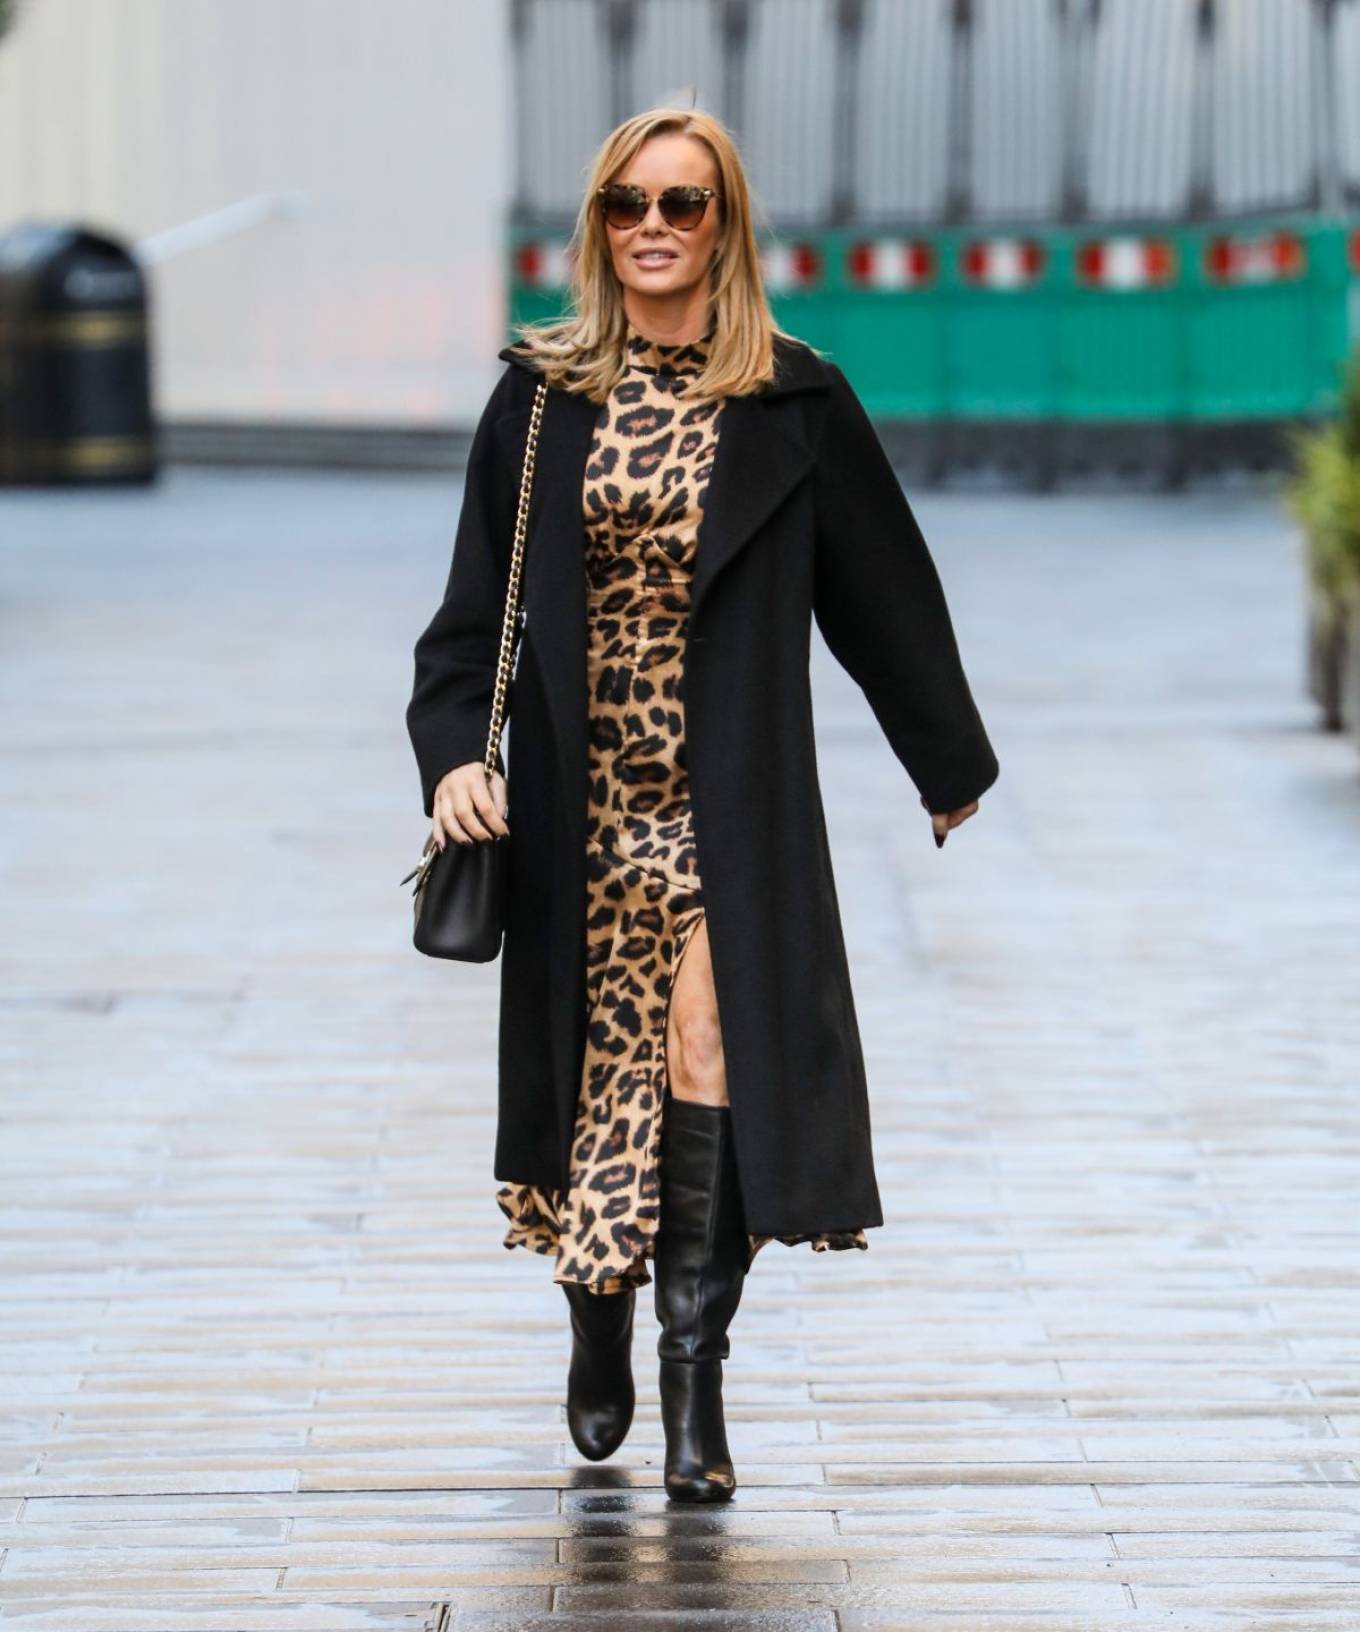 Amanda Holden 2020 : Amanda Holden – out and about in London -02